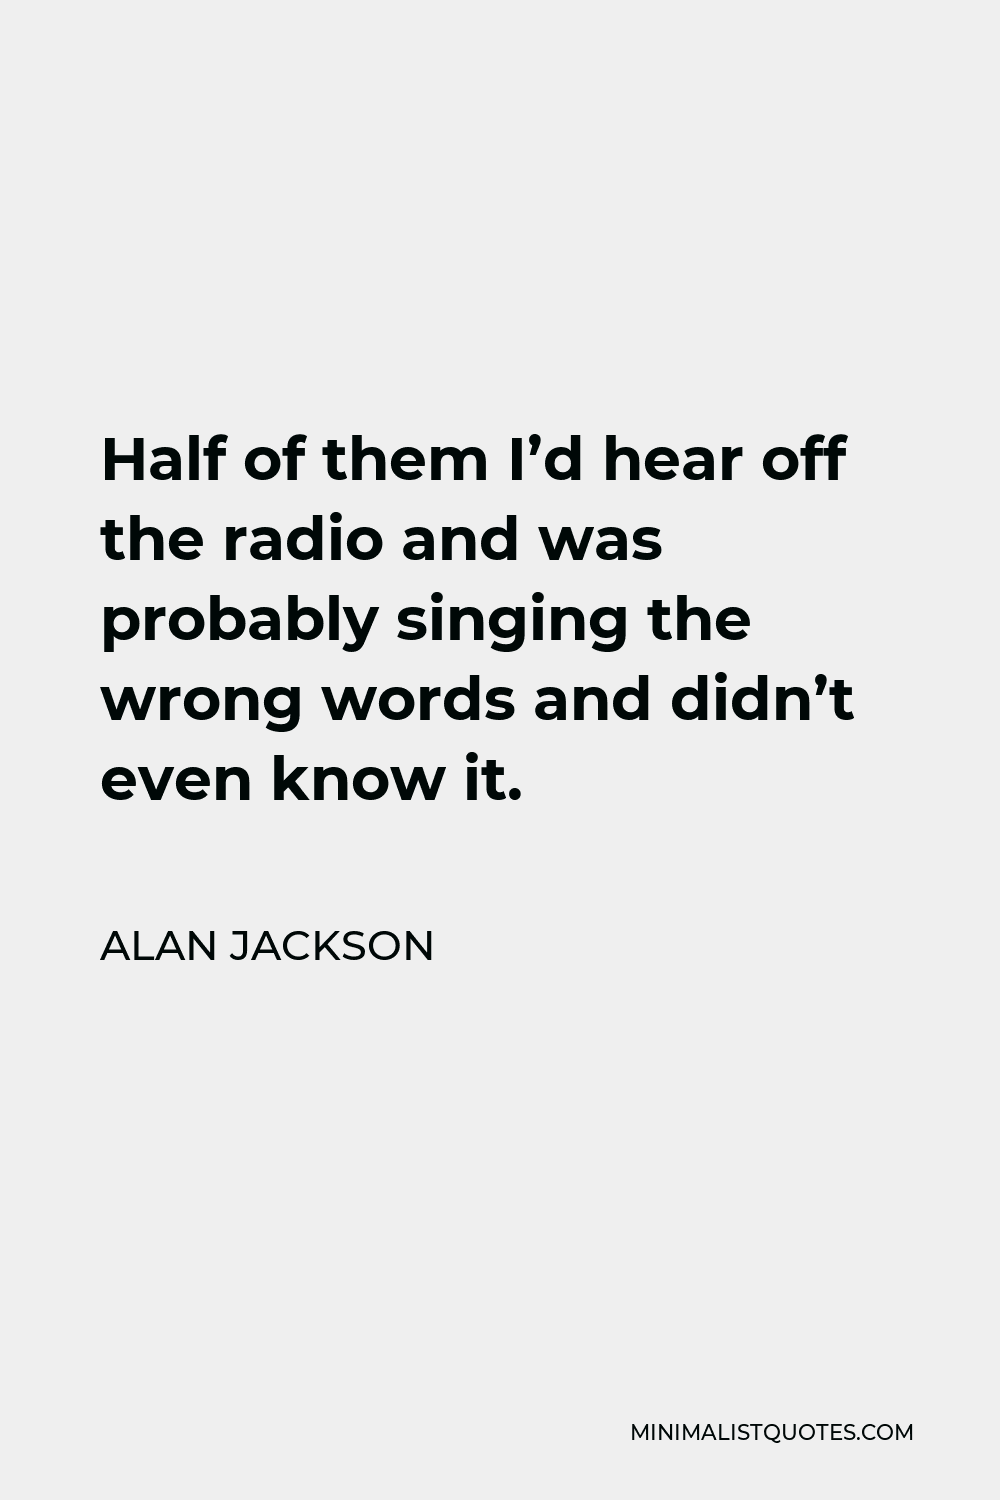 Alan Jackson Quote - Half of them I’d hear off the radio and was probably singing the wrong words and didn’t even know it.